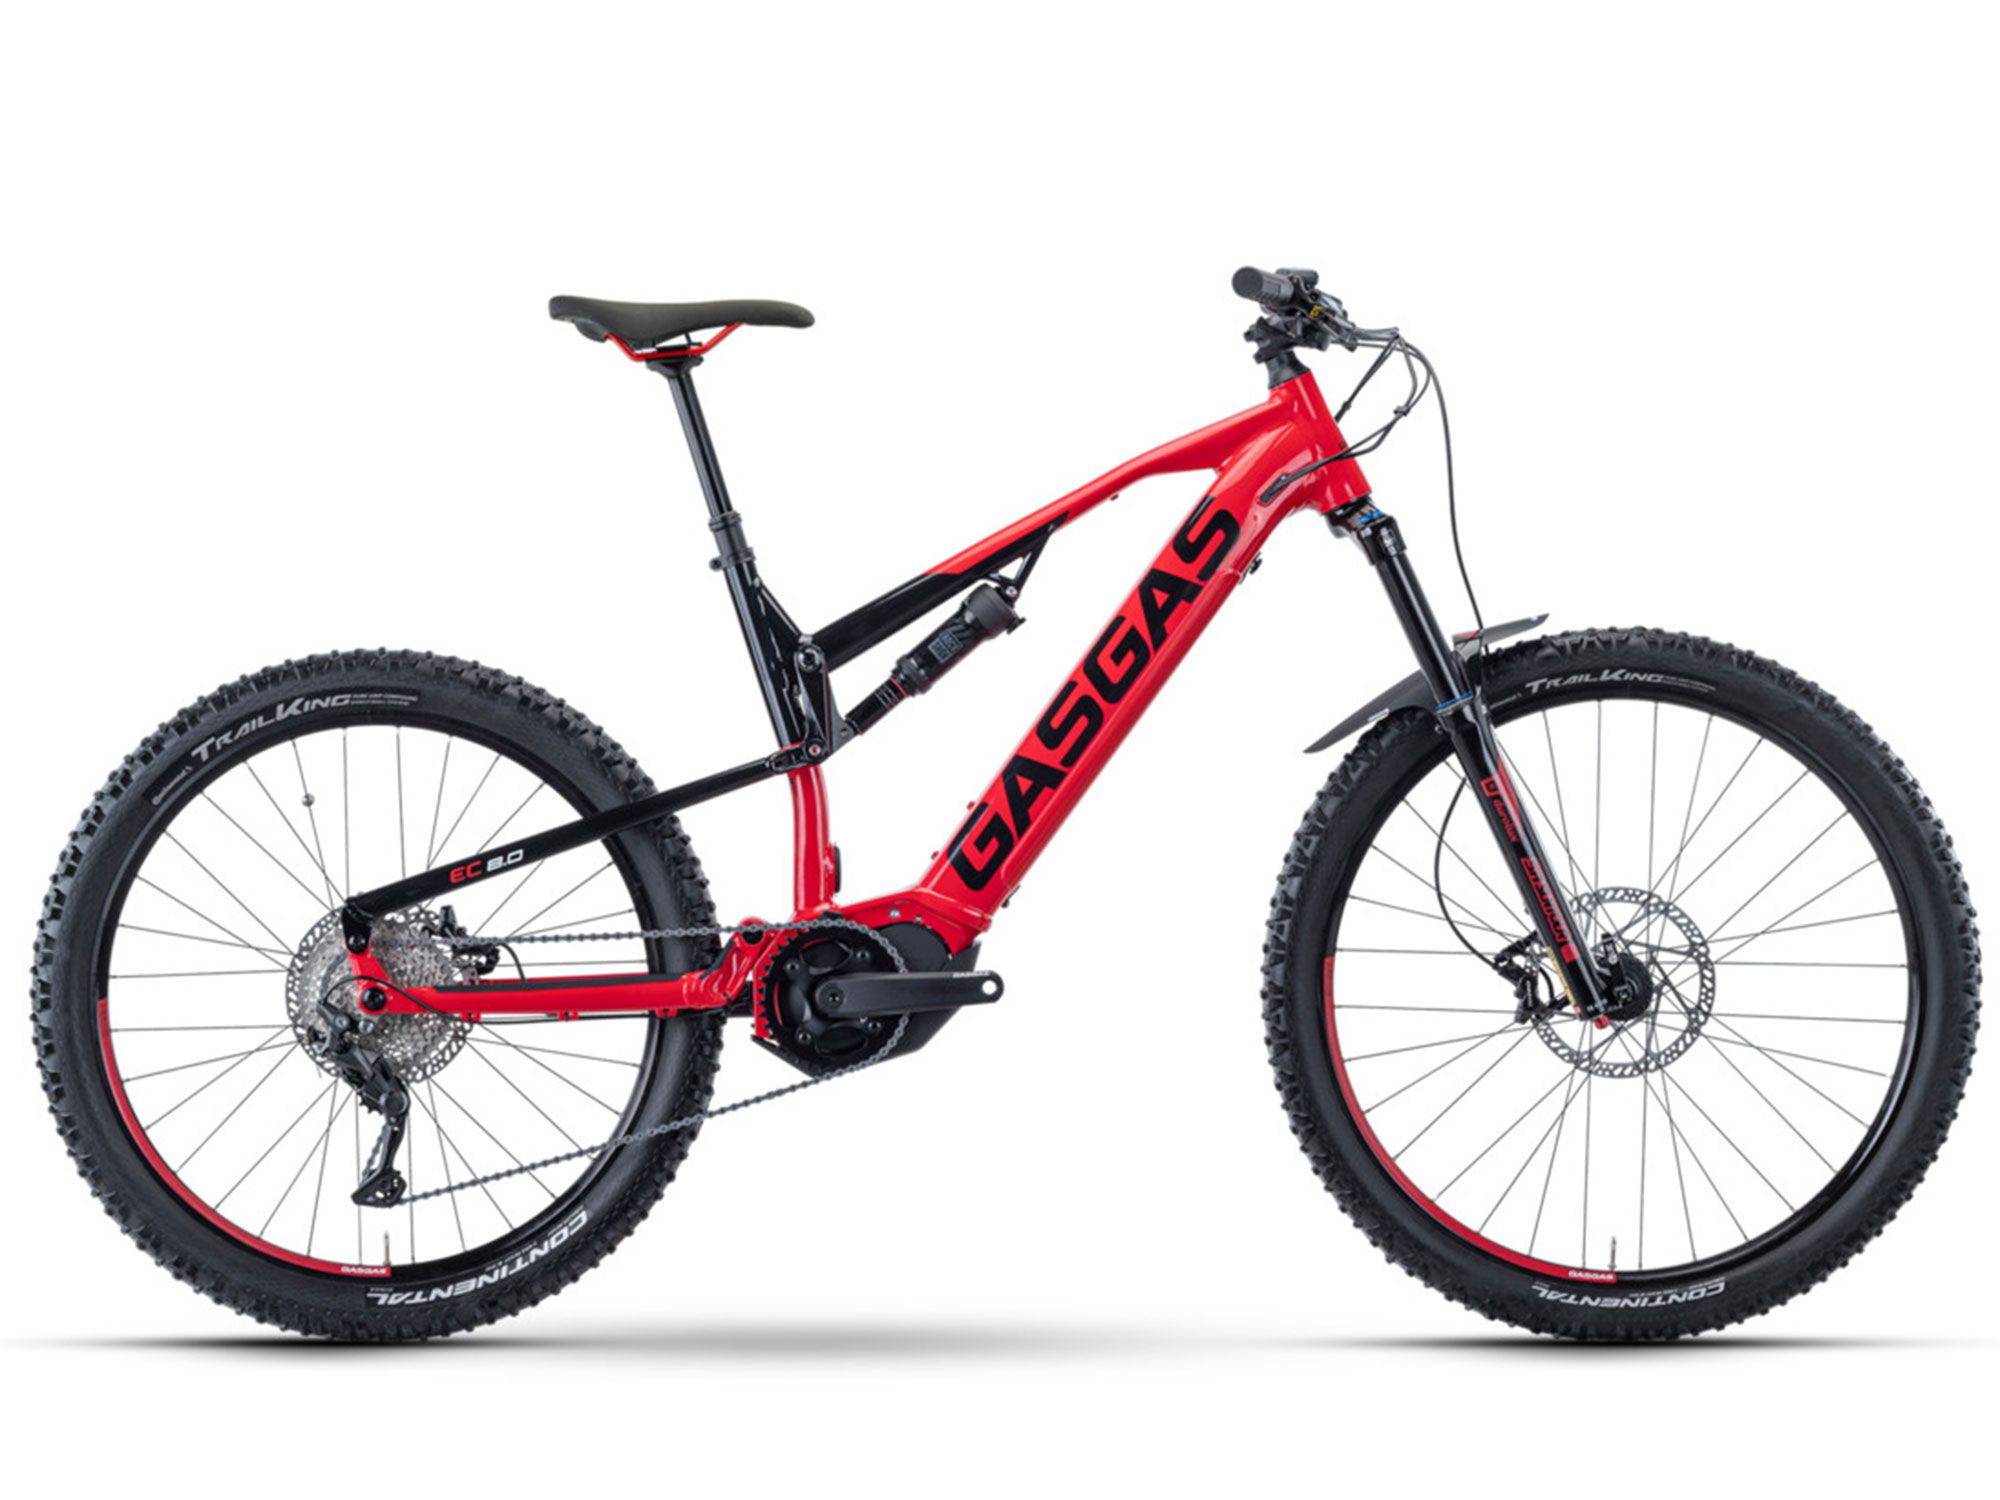 The Enduro Cross 8.0 is the most affordable entry in the 2021 GasGas Enduro Cross family.